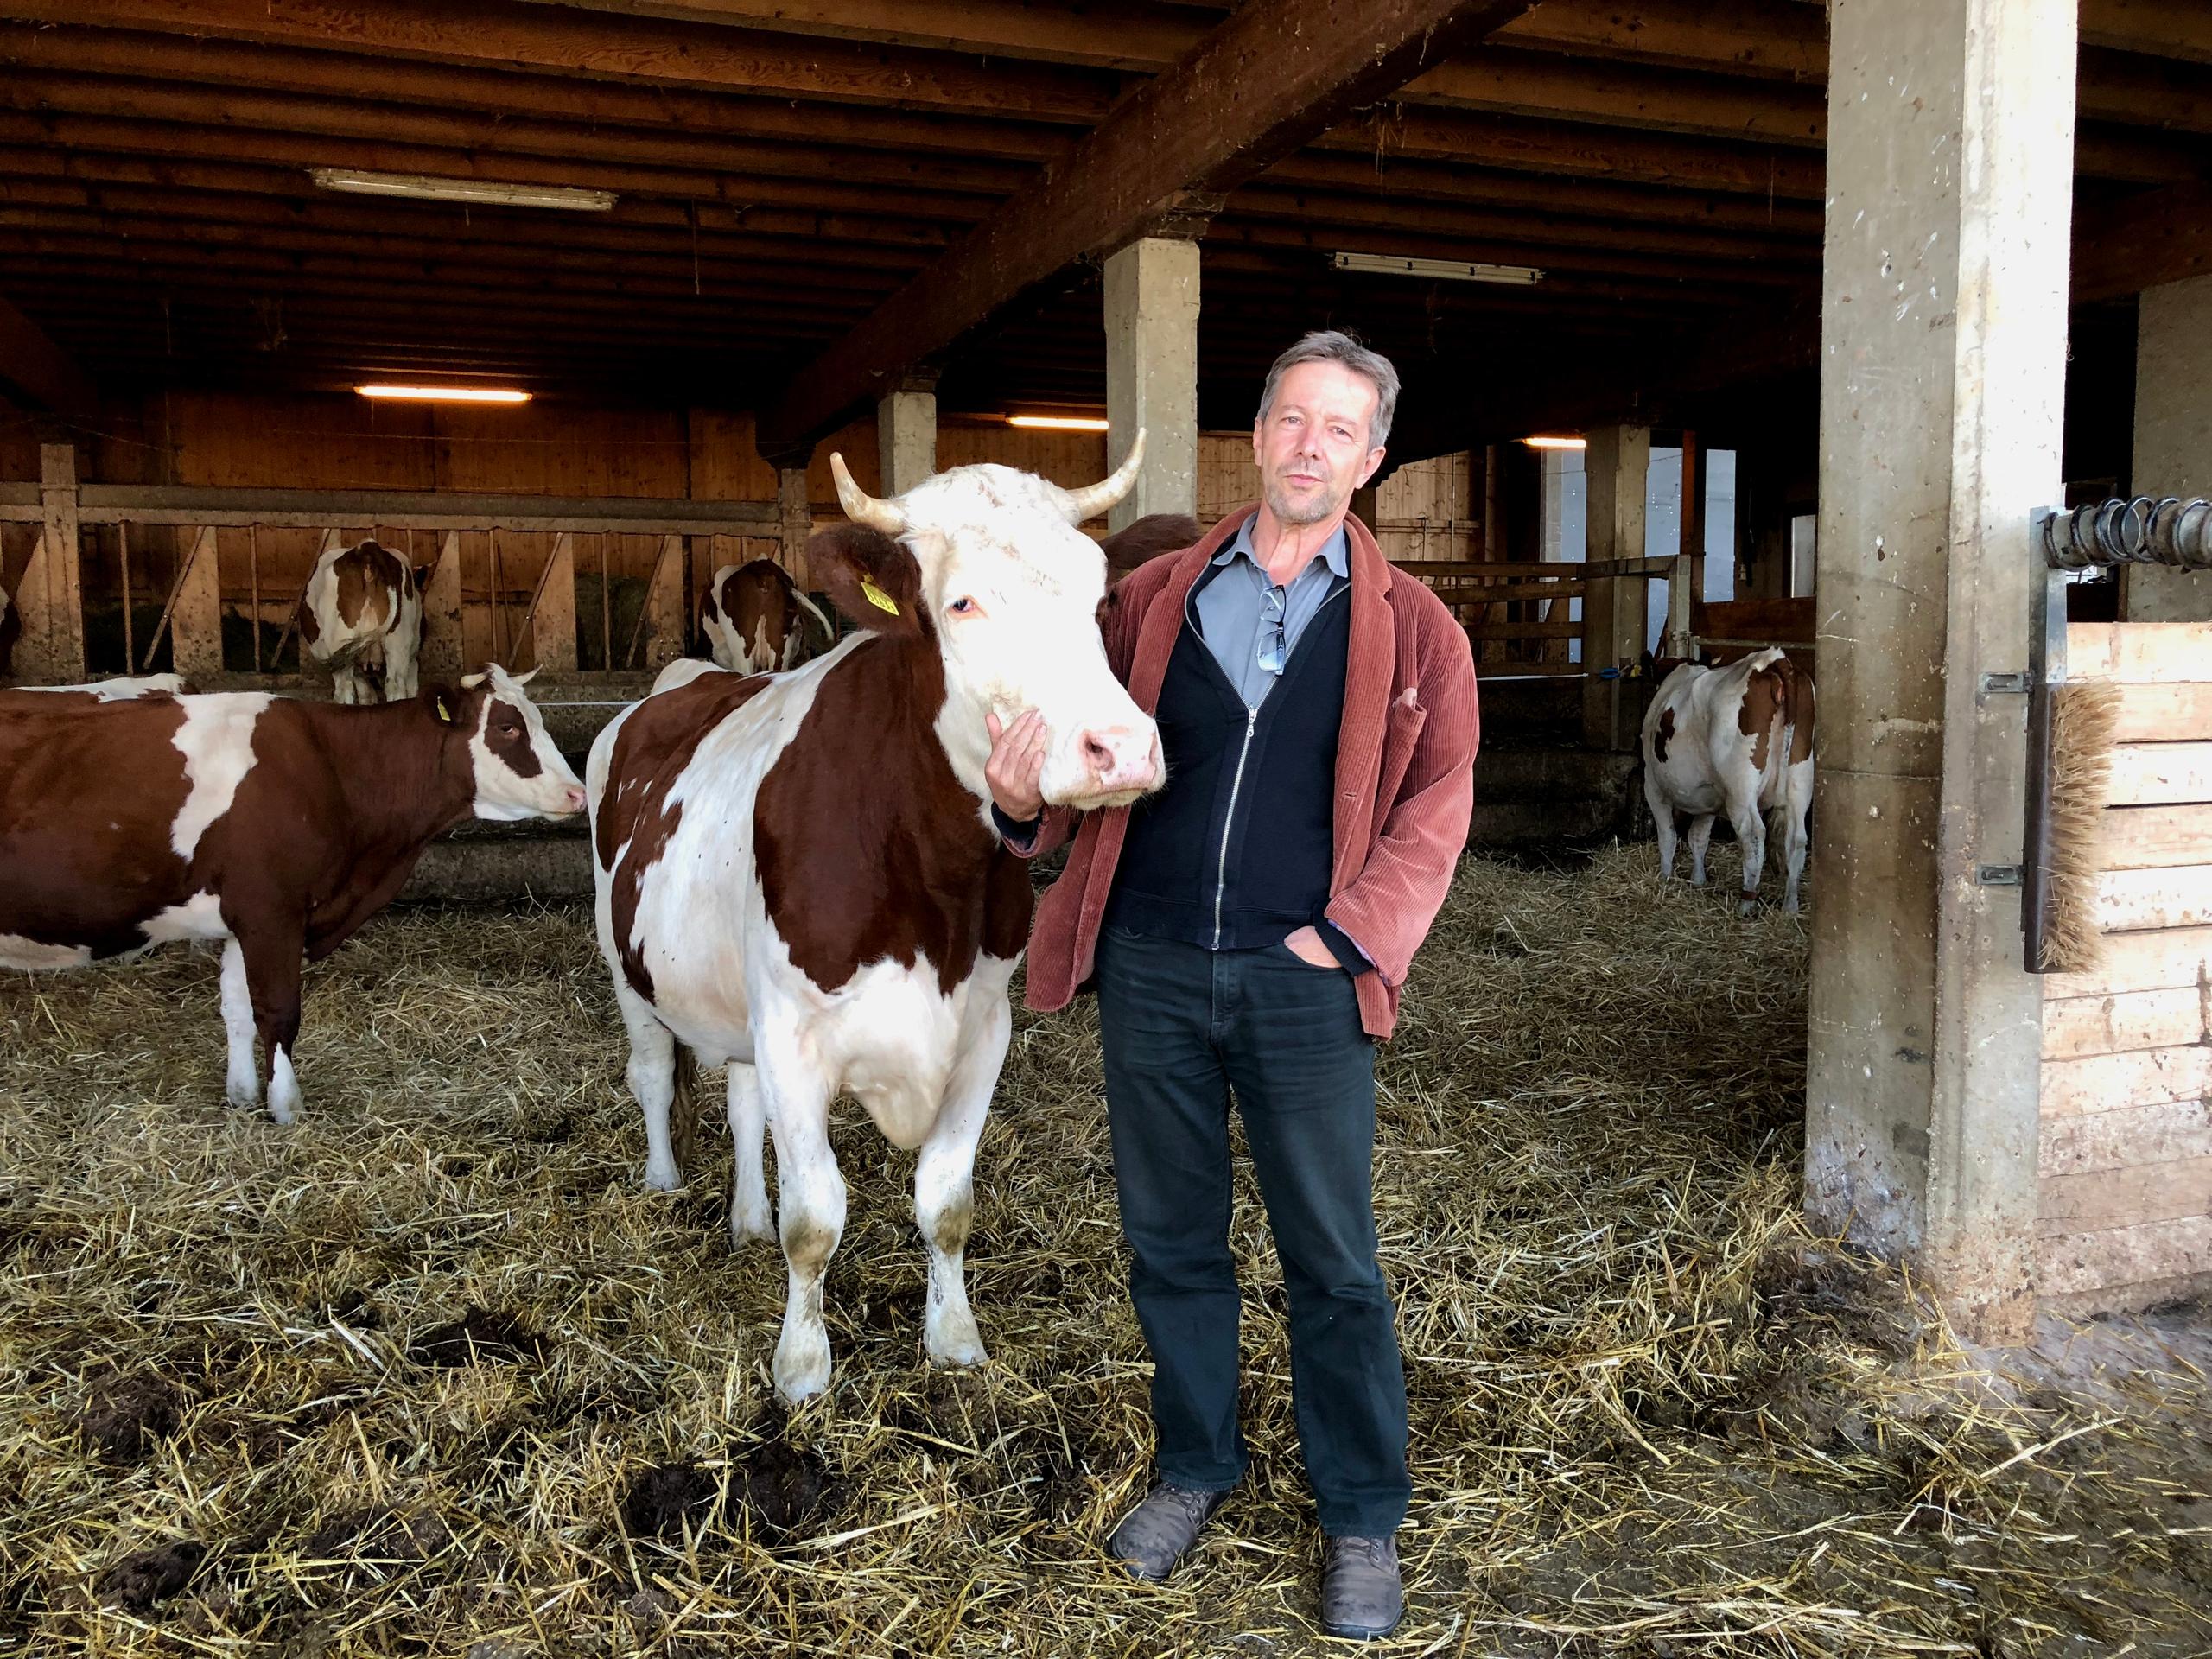 Ueli Hurter and his cows in his free-range shed